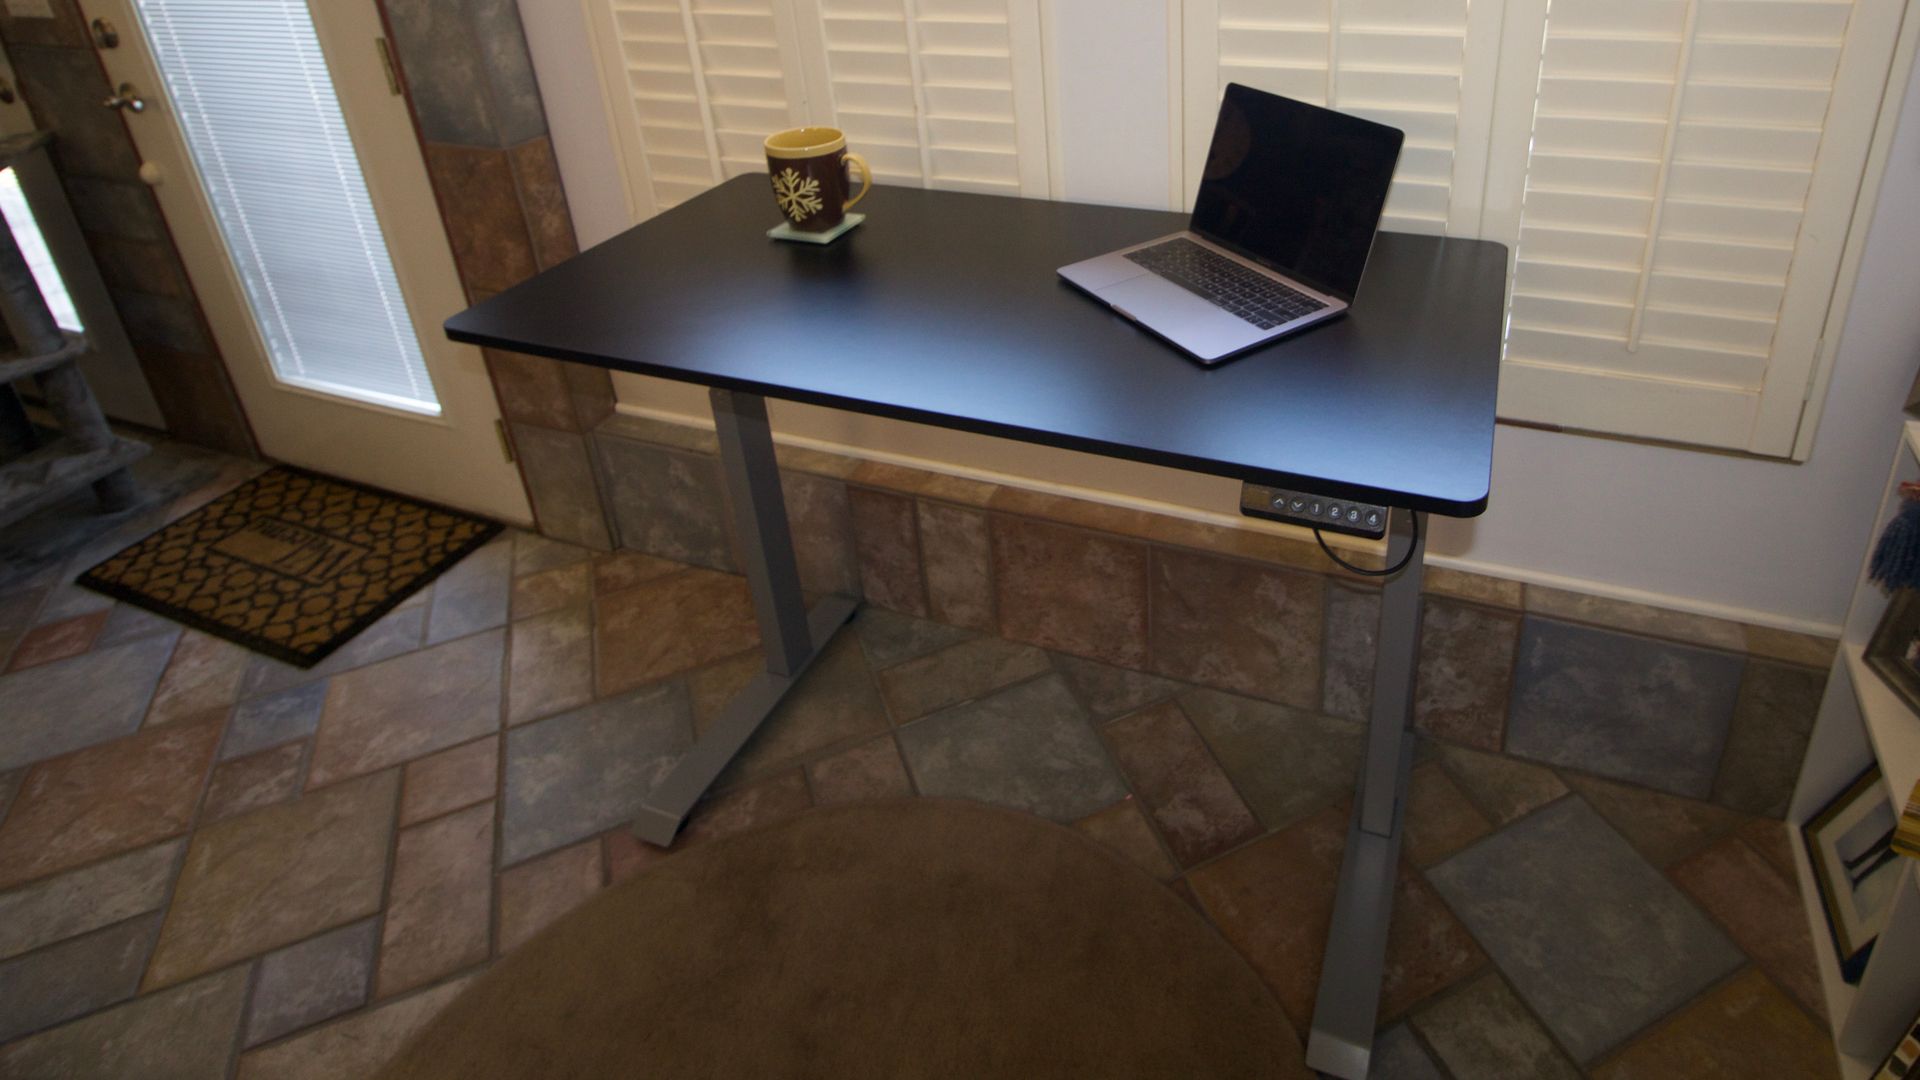 Victor High Rise desk with a laptop and coffee mug on the surface.